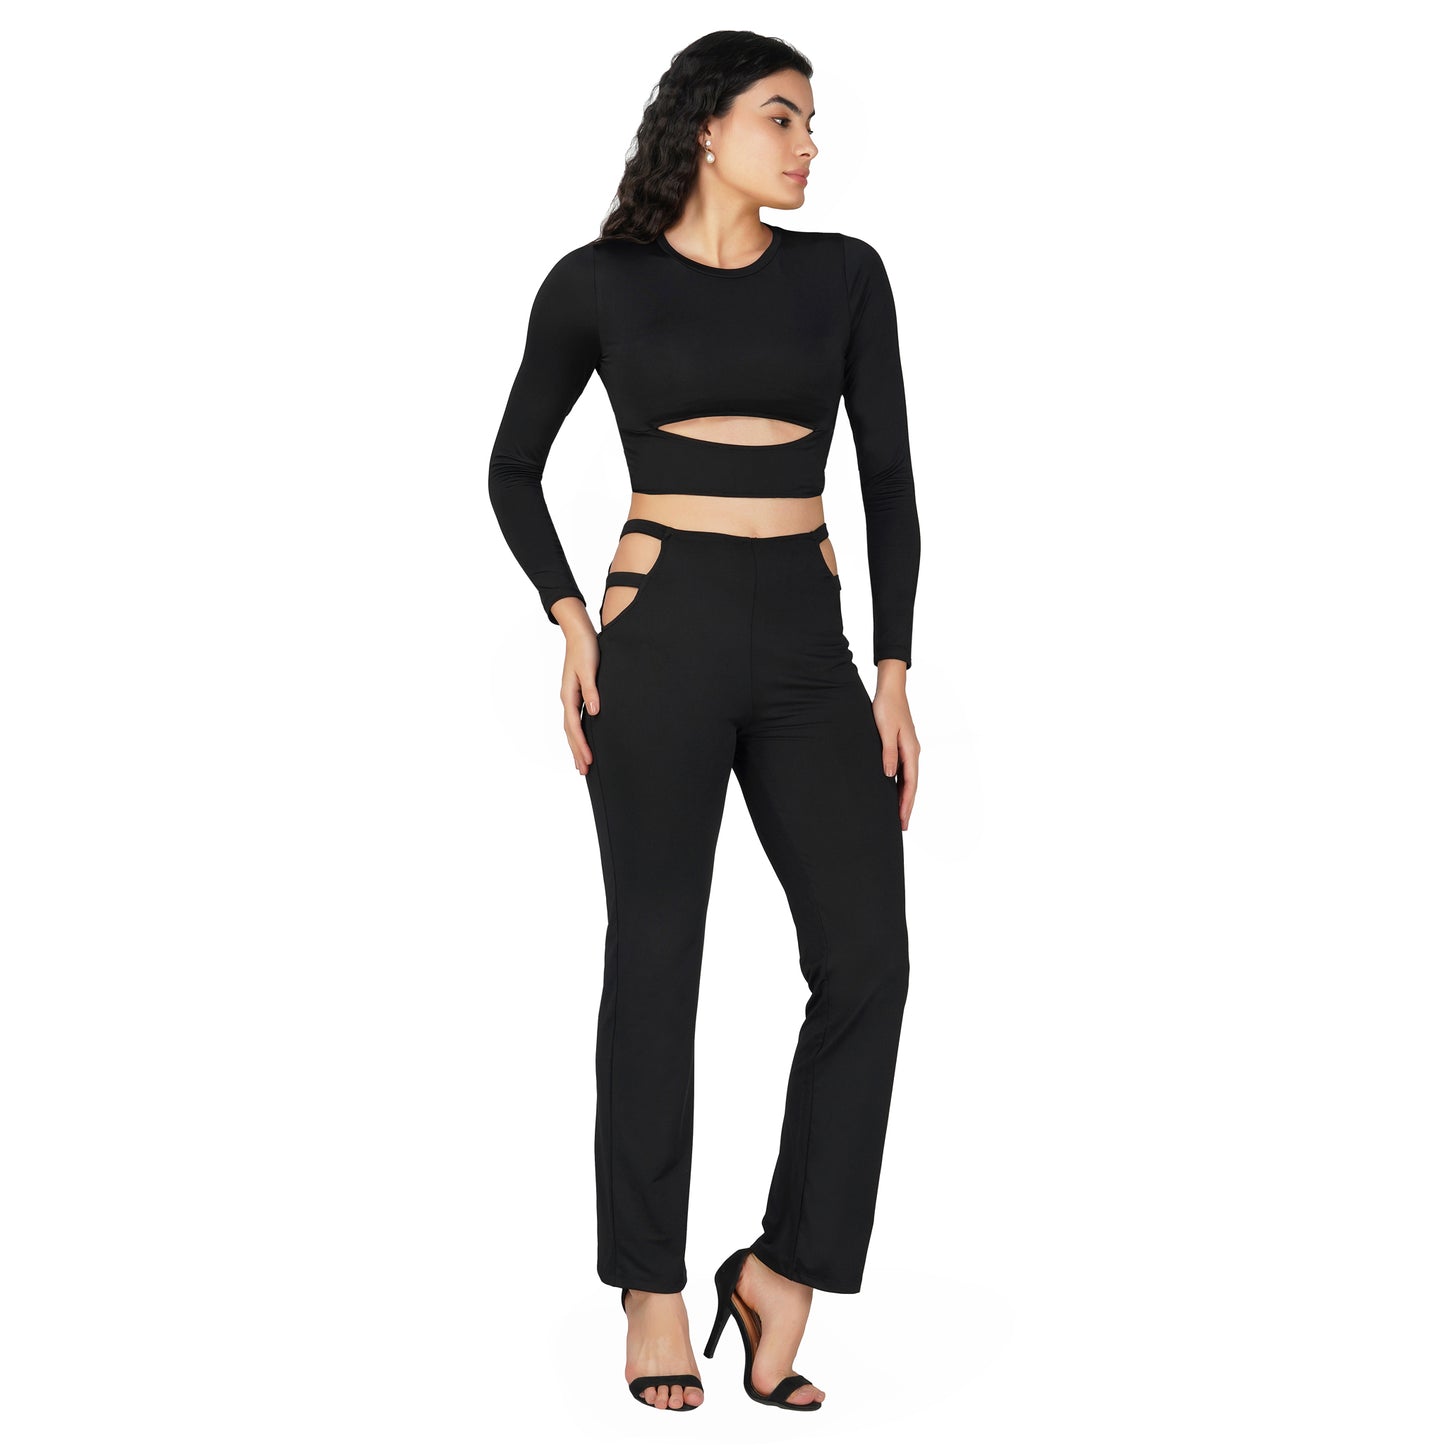 SLAY. Sport Women's Cutout Full Sleeves Crop Top And Pants Co-ord Set Black